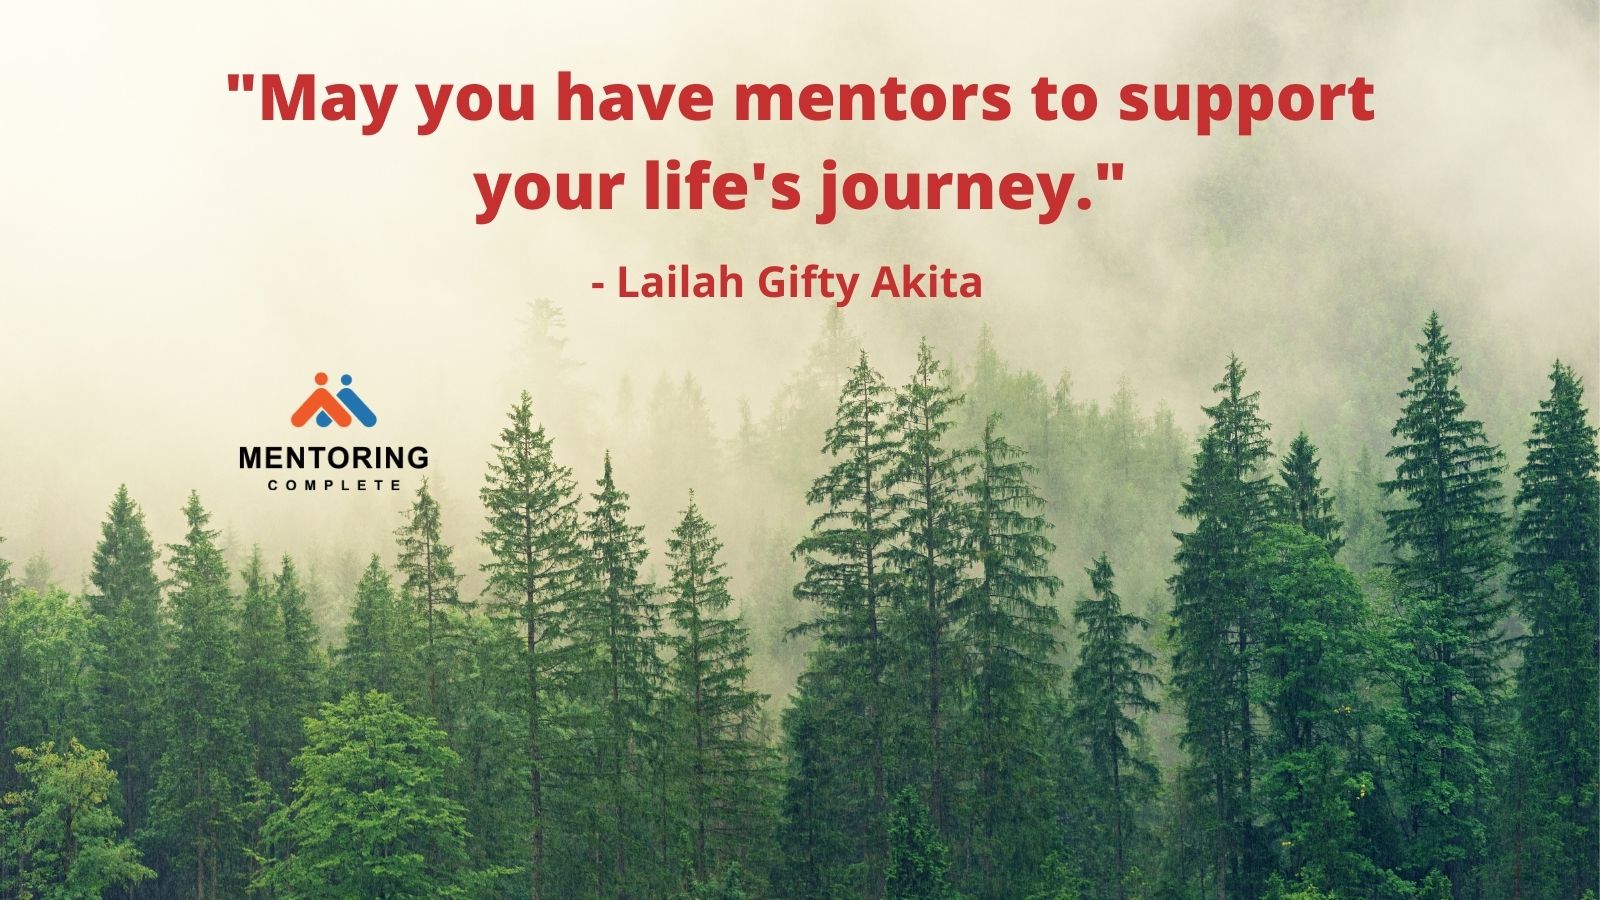 _May you have mentors to support your lifes journey._